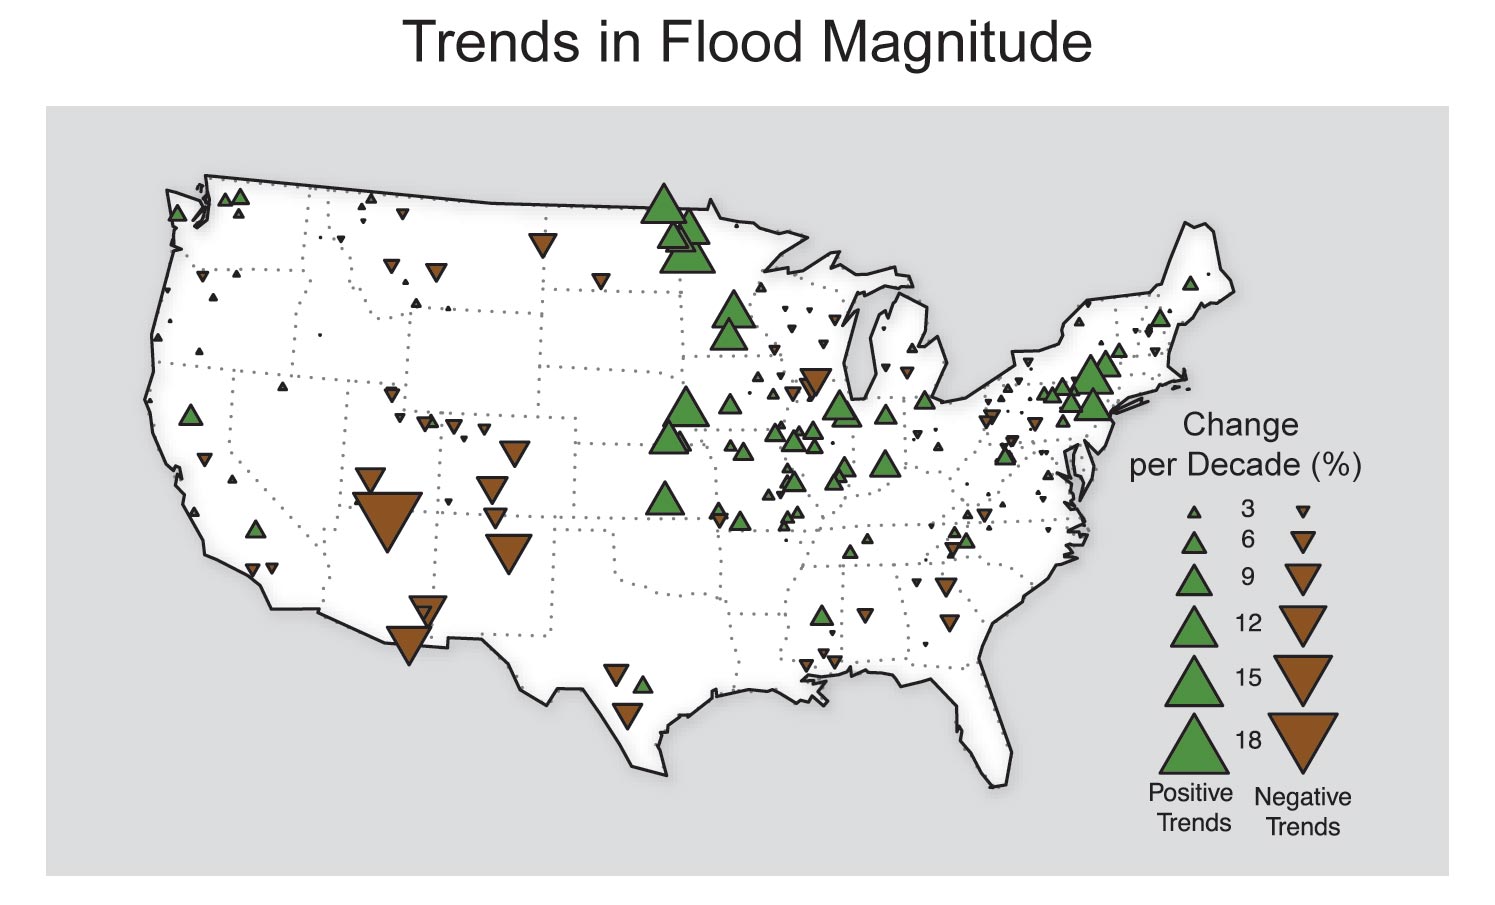 Trends in Flood Magnitude